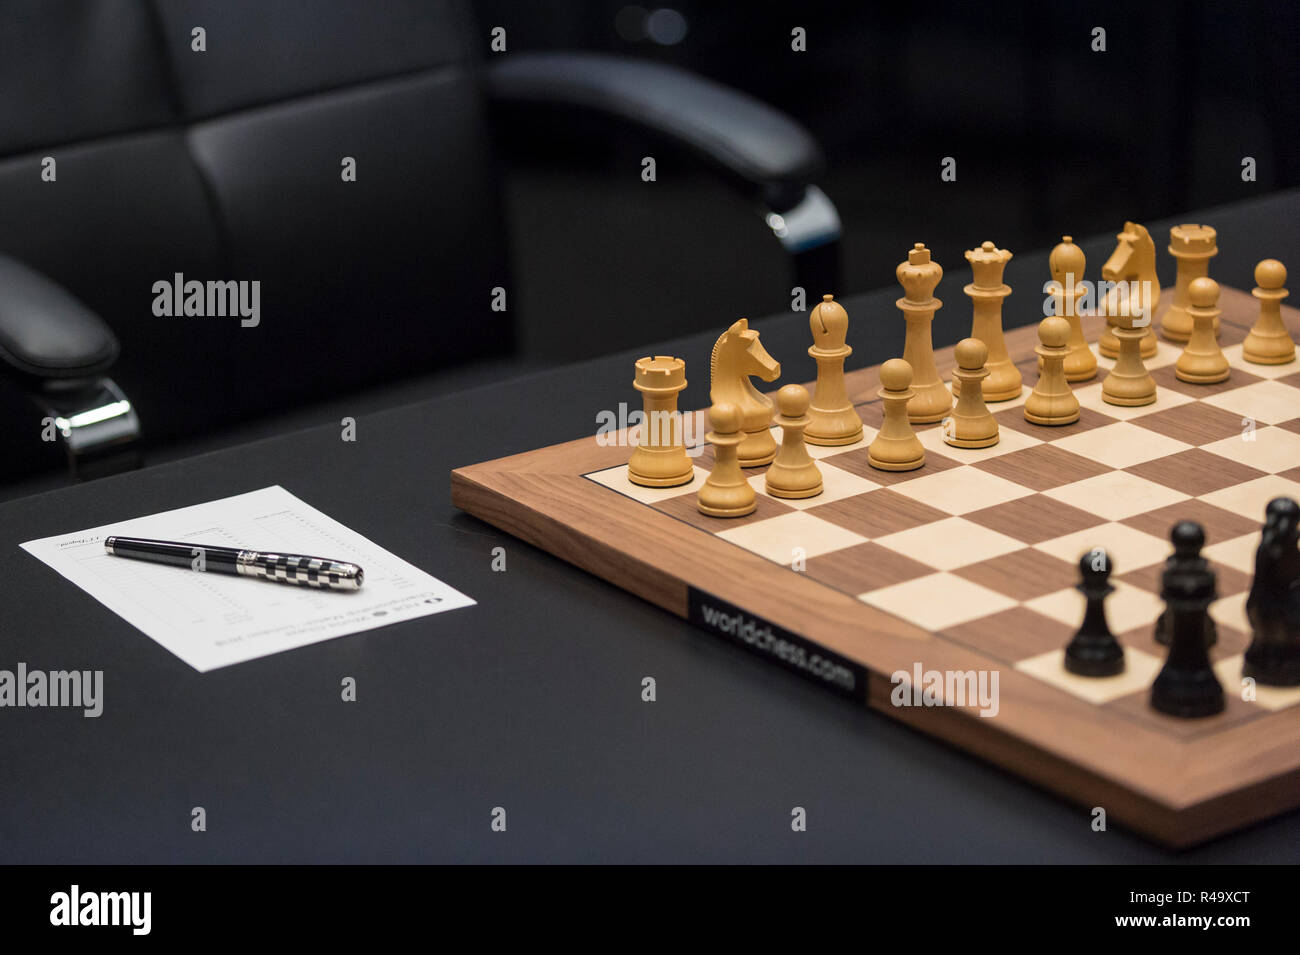 How chess champ Fabiano Caruana keeps his head in the game